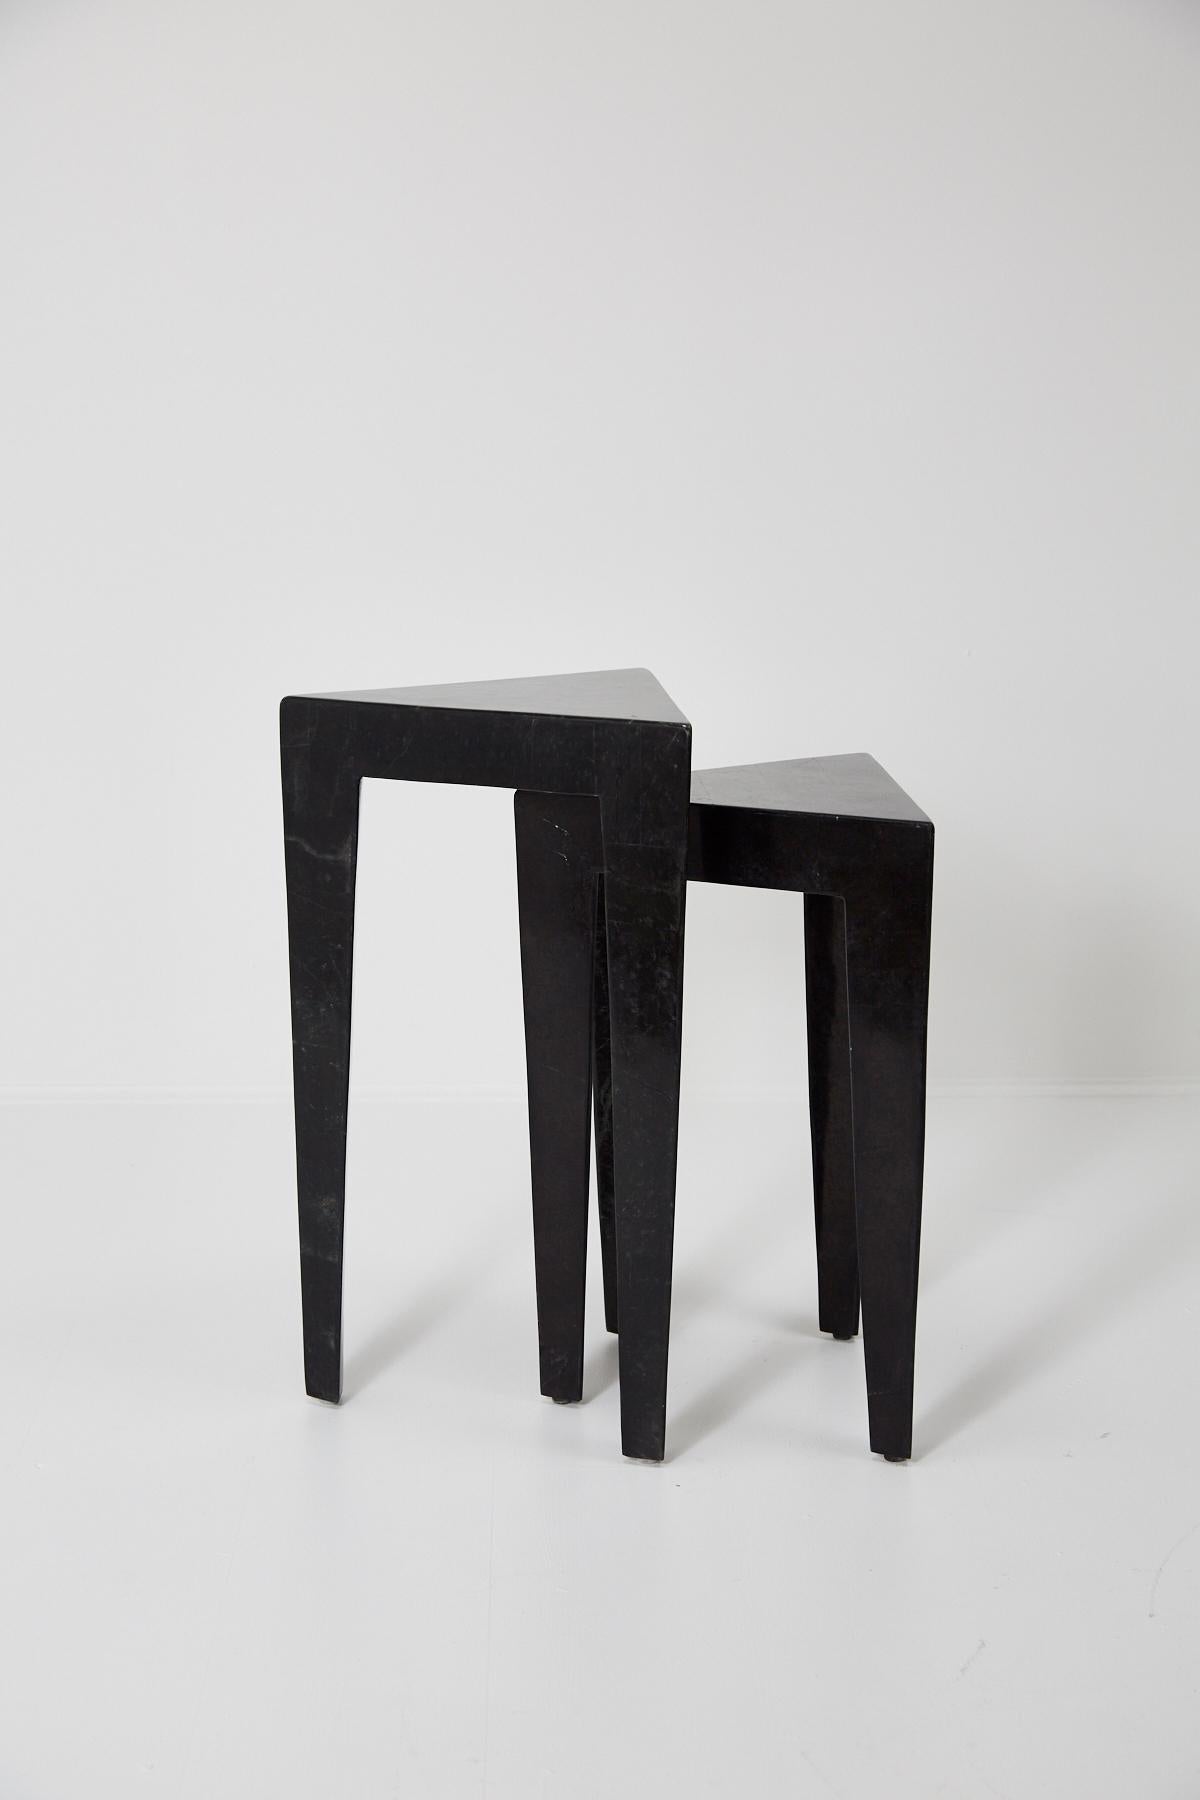 Post-Modern Black Tessellated Stone Triangular Nesting Tables, 1990s For Sale